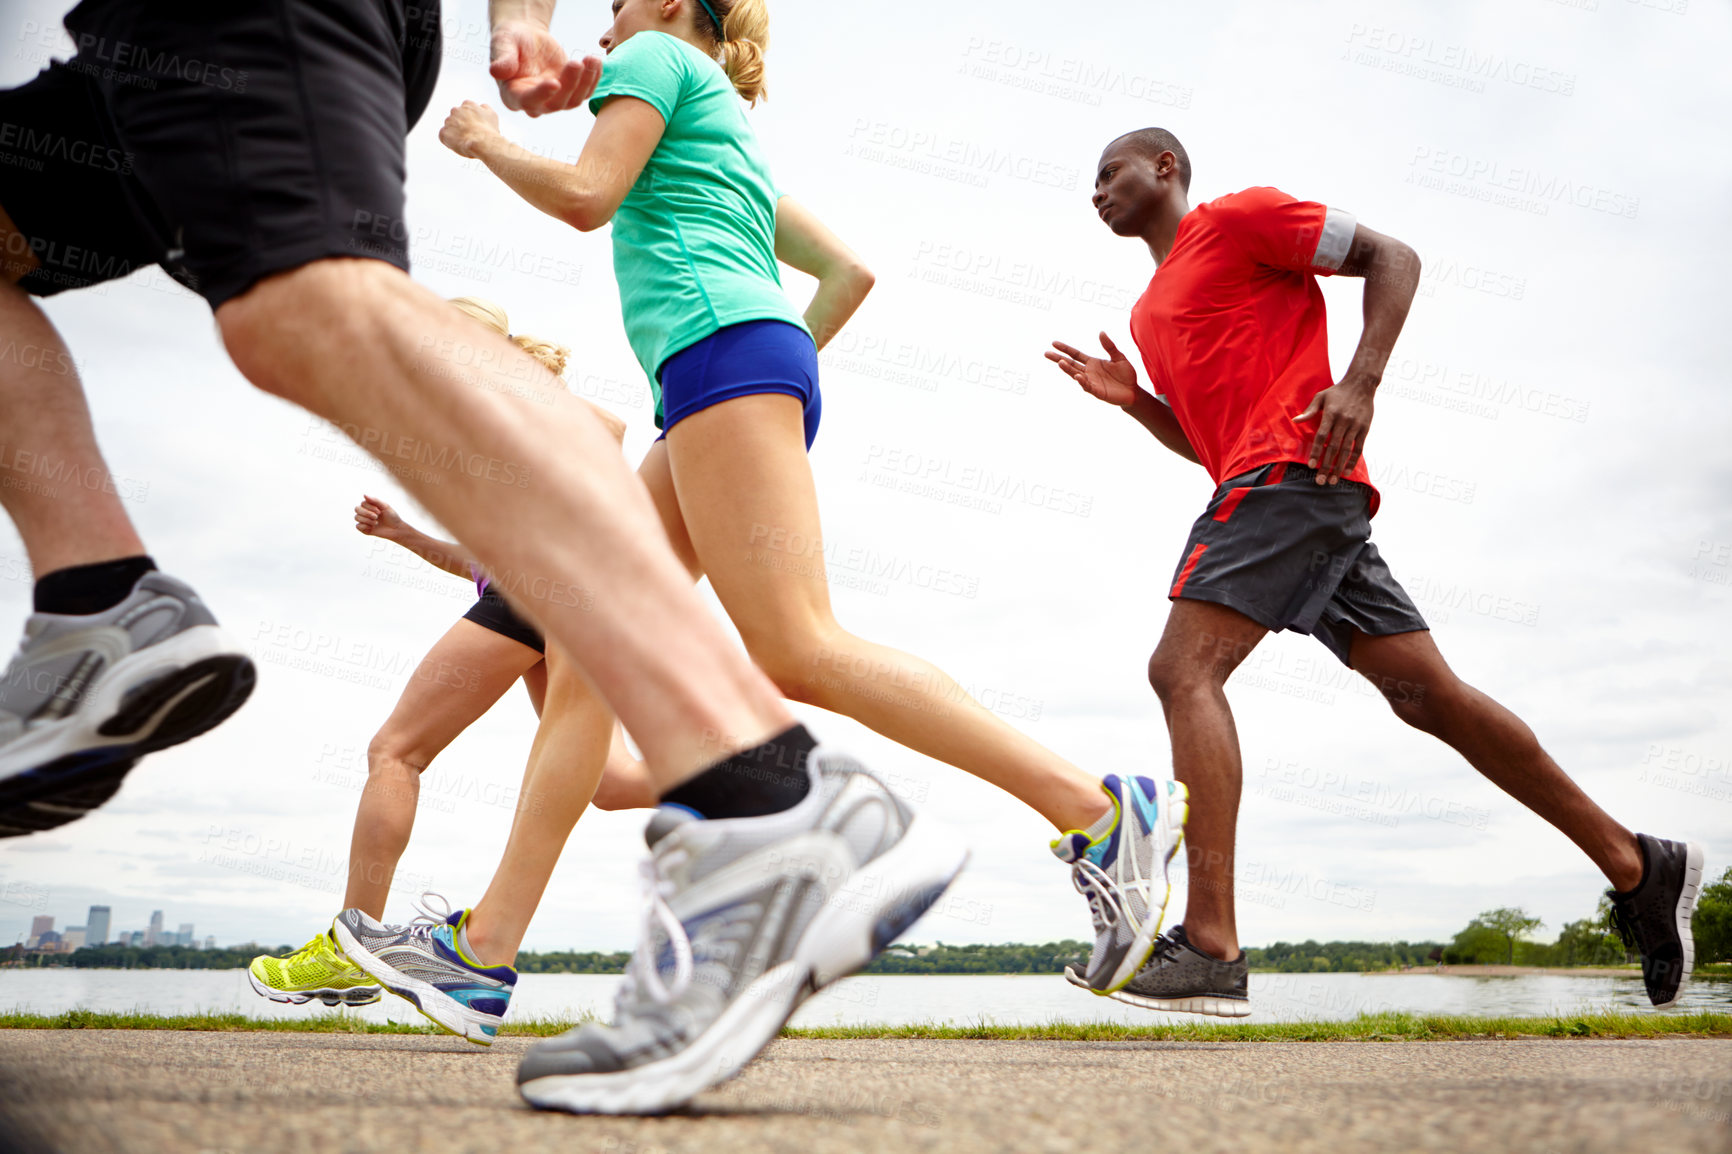 Buy stock photo Low angle side view of athletes running a race